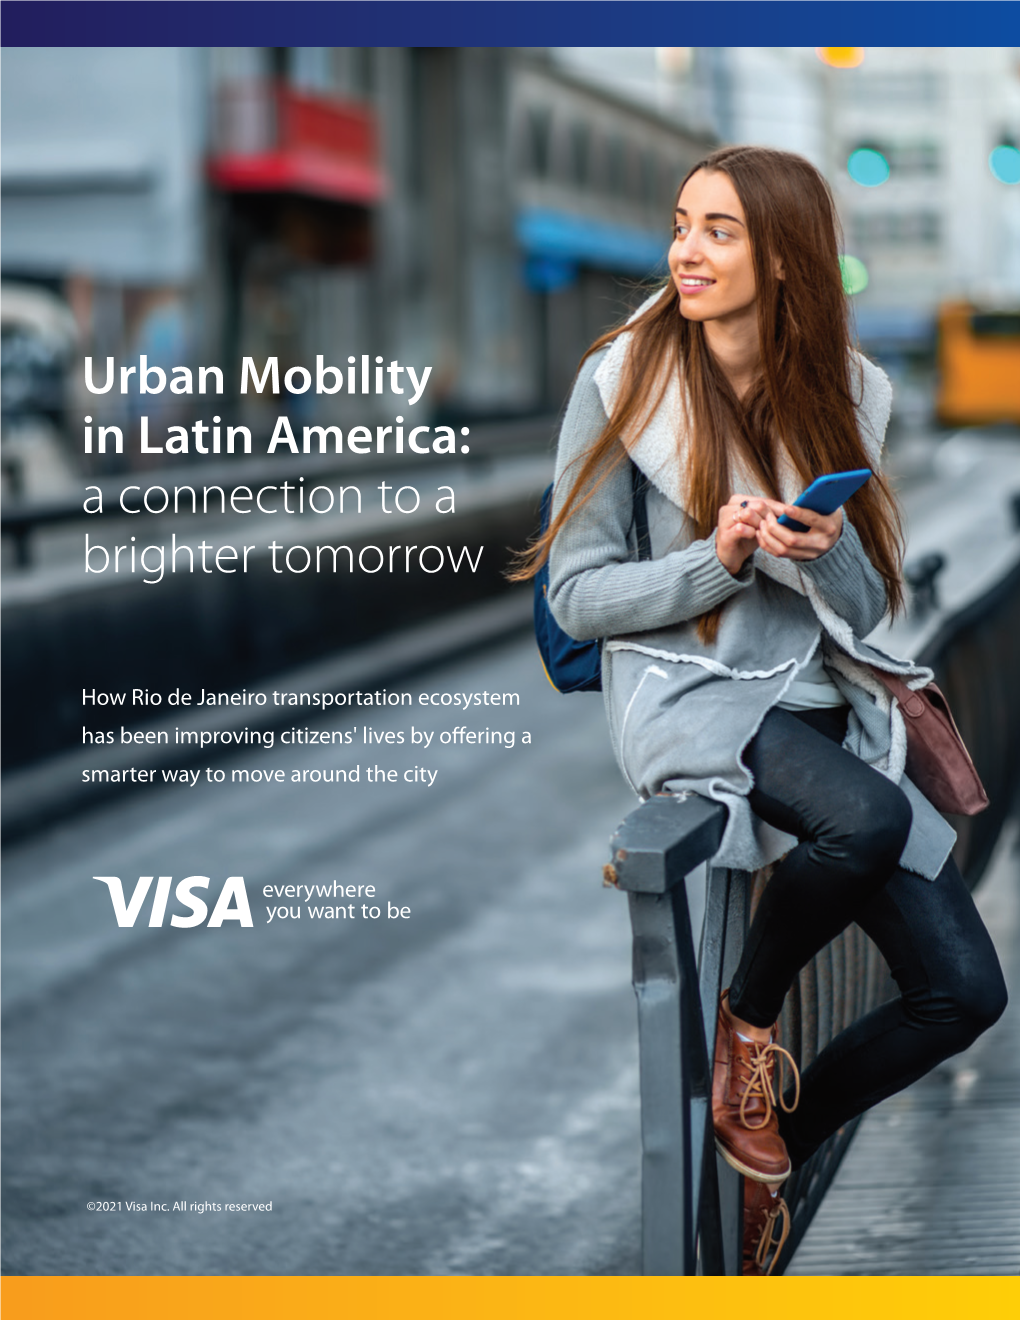 Urban Mobility in Latin America: a Connection to a Brighter Tomorrow